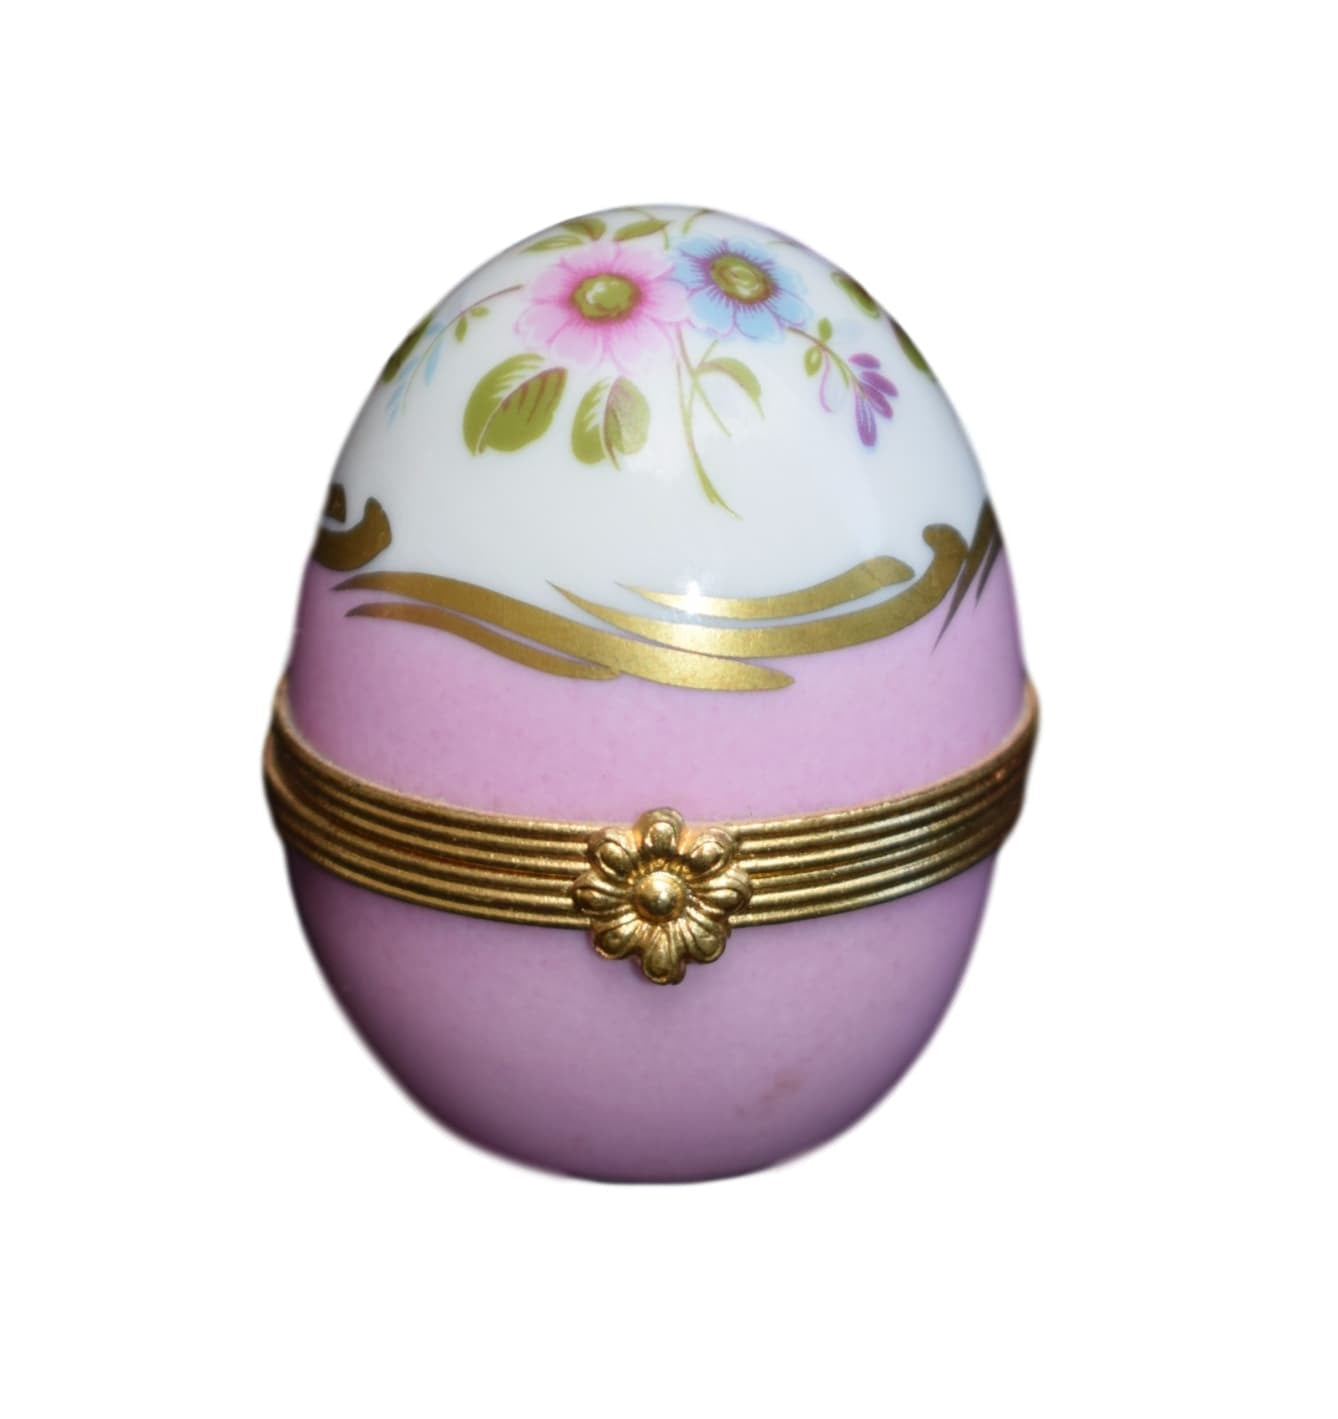 French Vintage Hand Painted Limoges Porcelain Egg Pill Box - Charmantiques